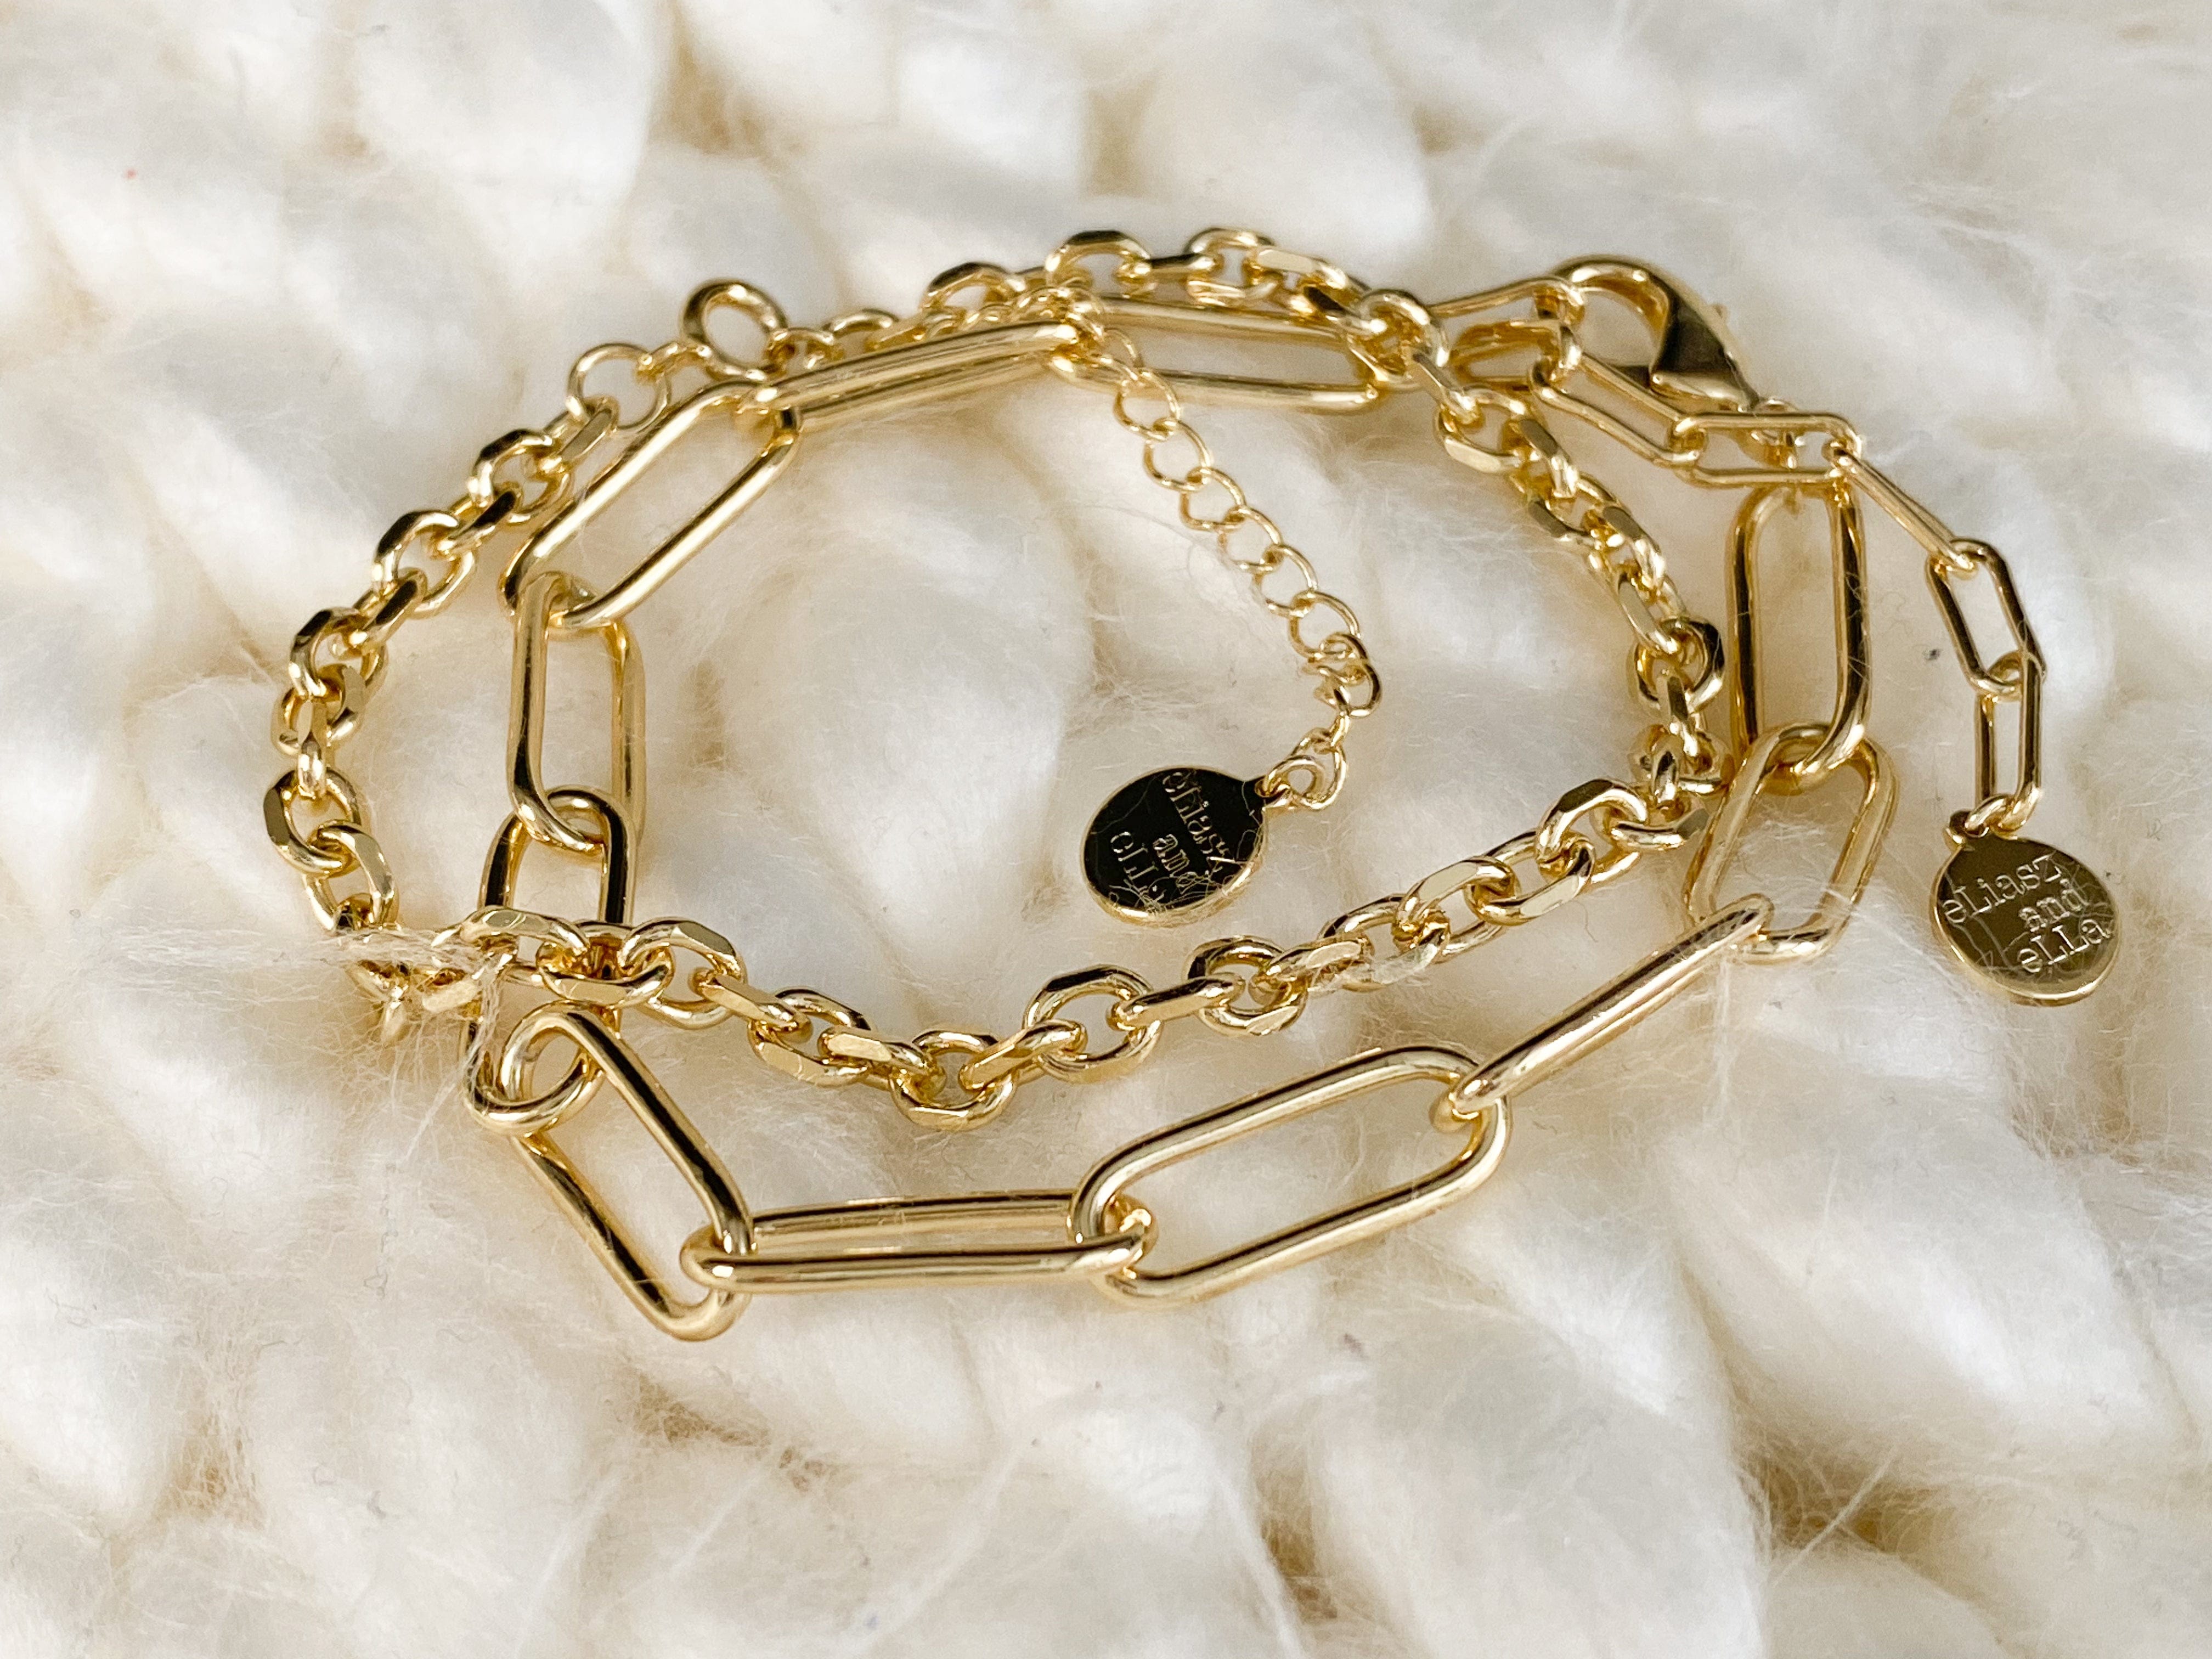 Connection Paperclip Chain Bracelet Gold – eLiasz and eLLa Jewelry